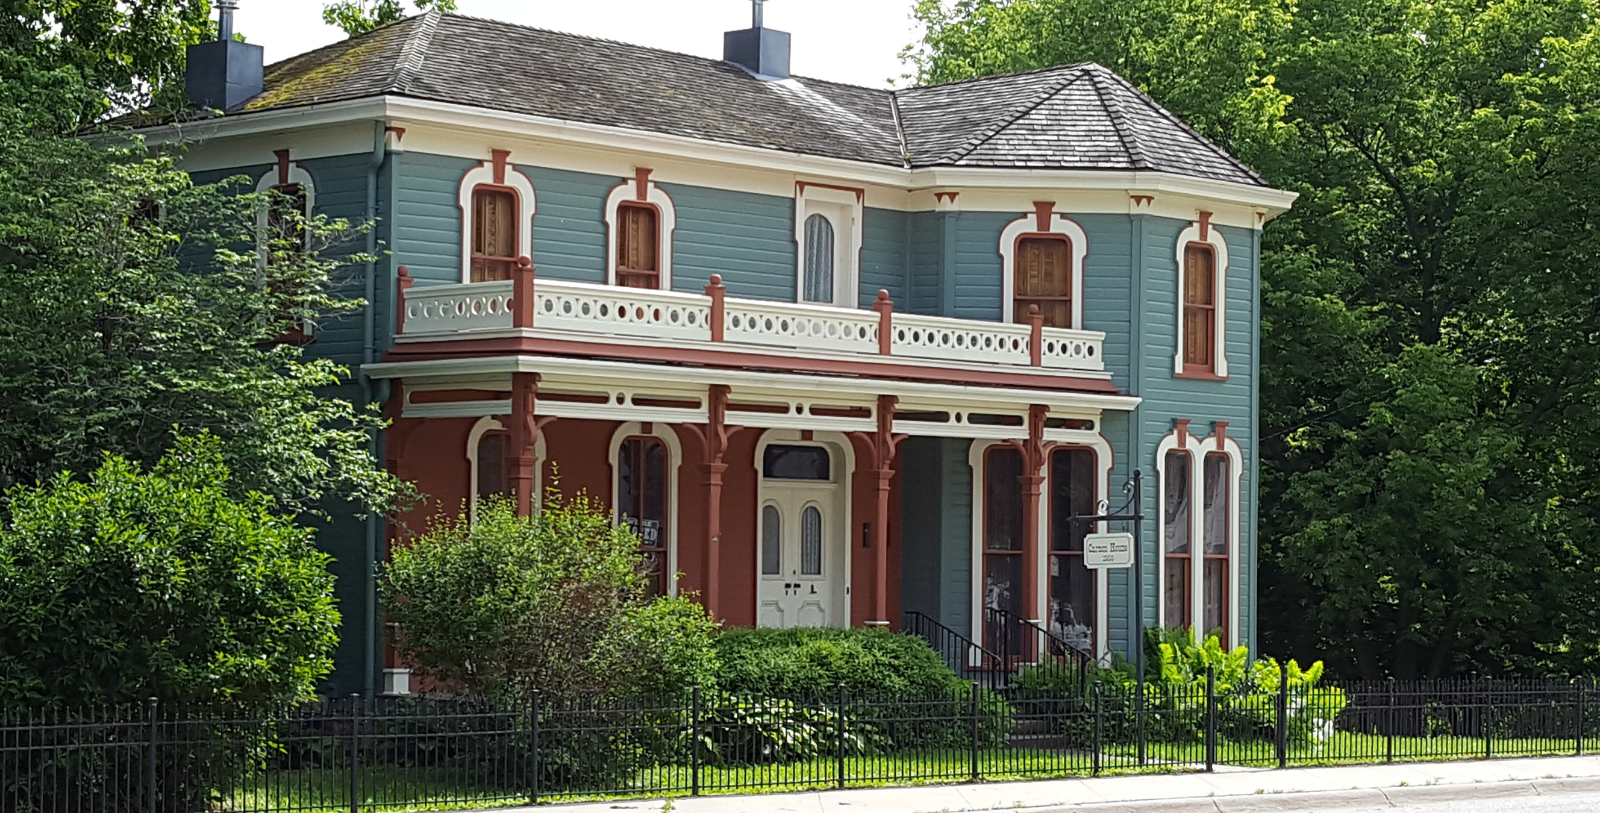 Explore Millionaire’s Row, a national historic district in Williamsport, PA.